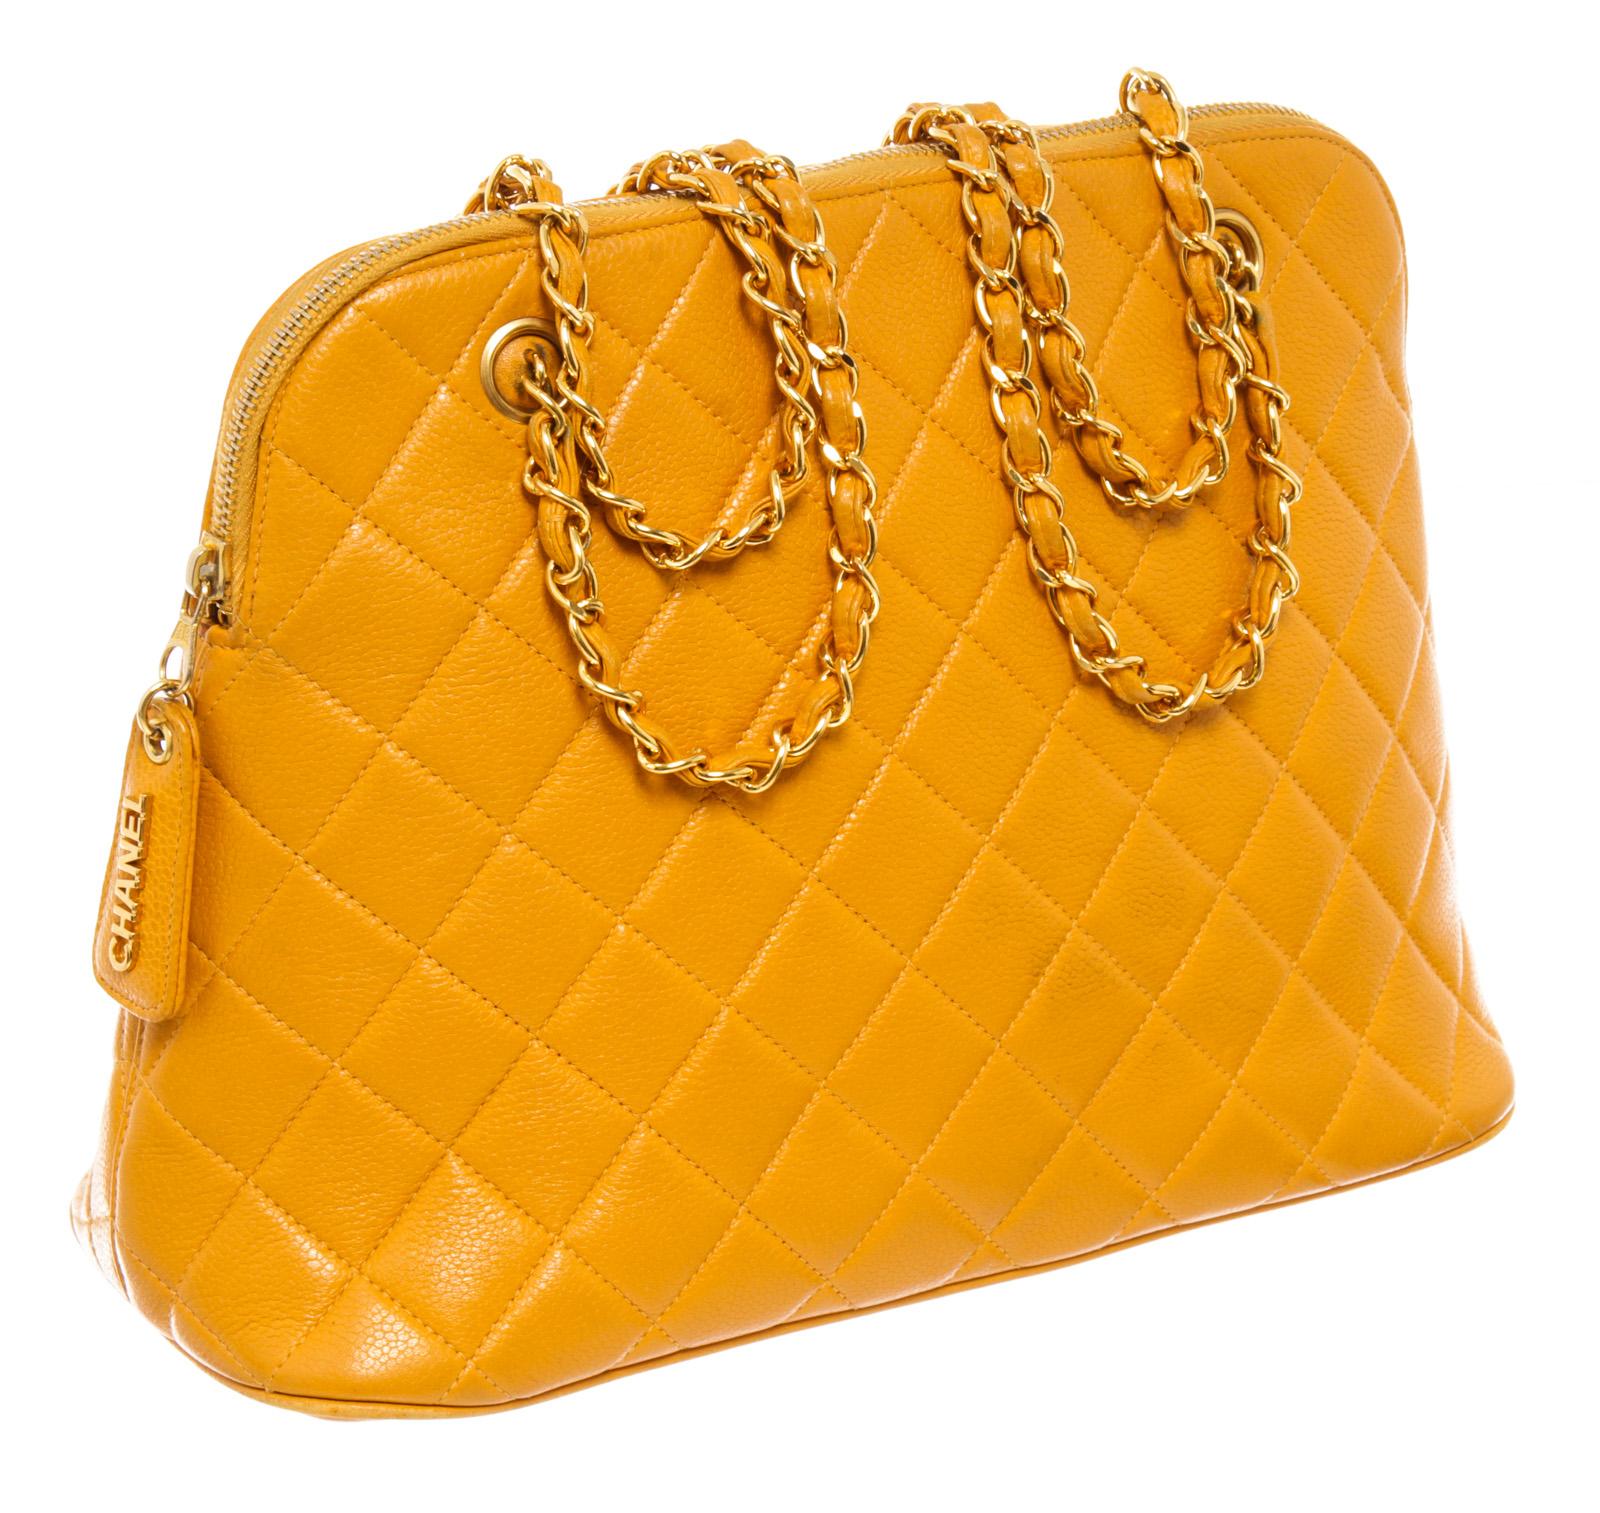 Chanel Matelasse Shoulder Bag in yellow quilted Caviar leather and has gold-tone hardware. It has a unique rounded top shape with a wrap-around zipper closure. The zipper has a stylish zipper tag with 